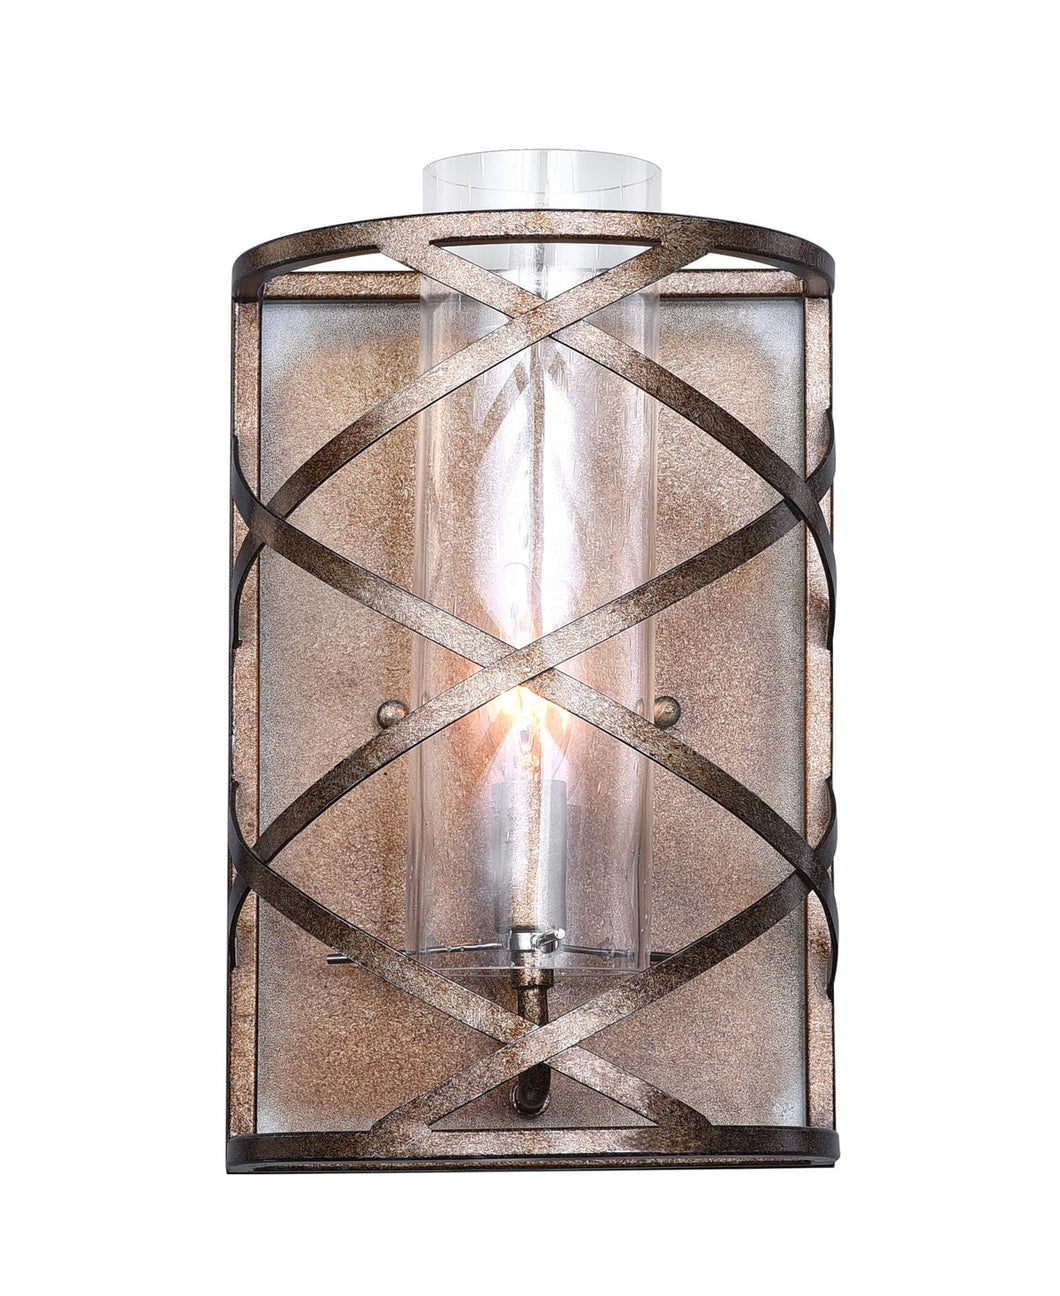 1 Light Wall Sconce with Wood Grain Bronze Finish